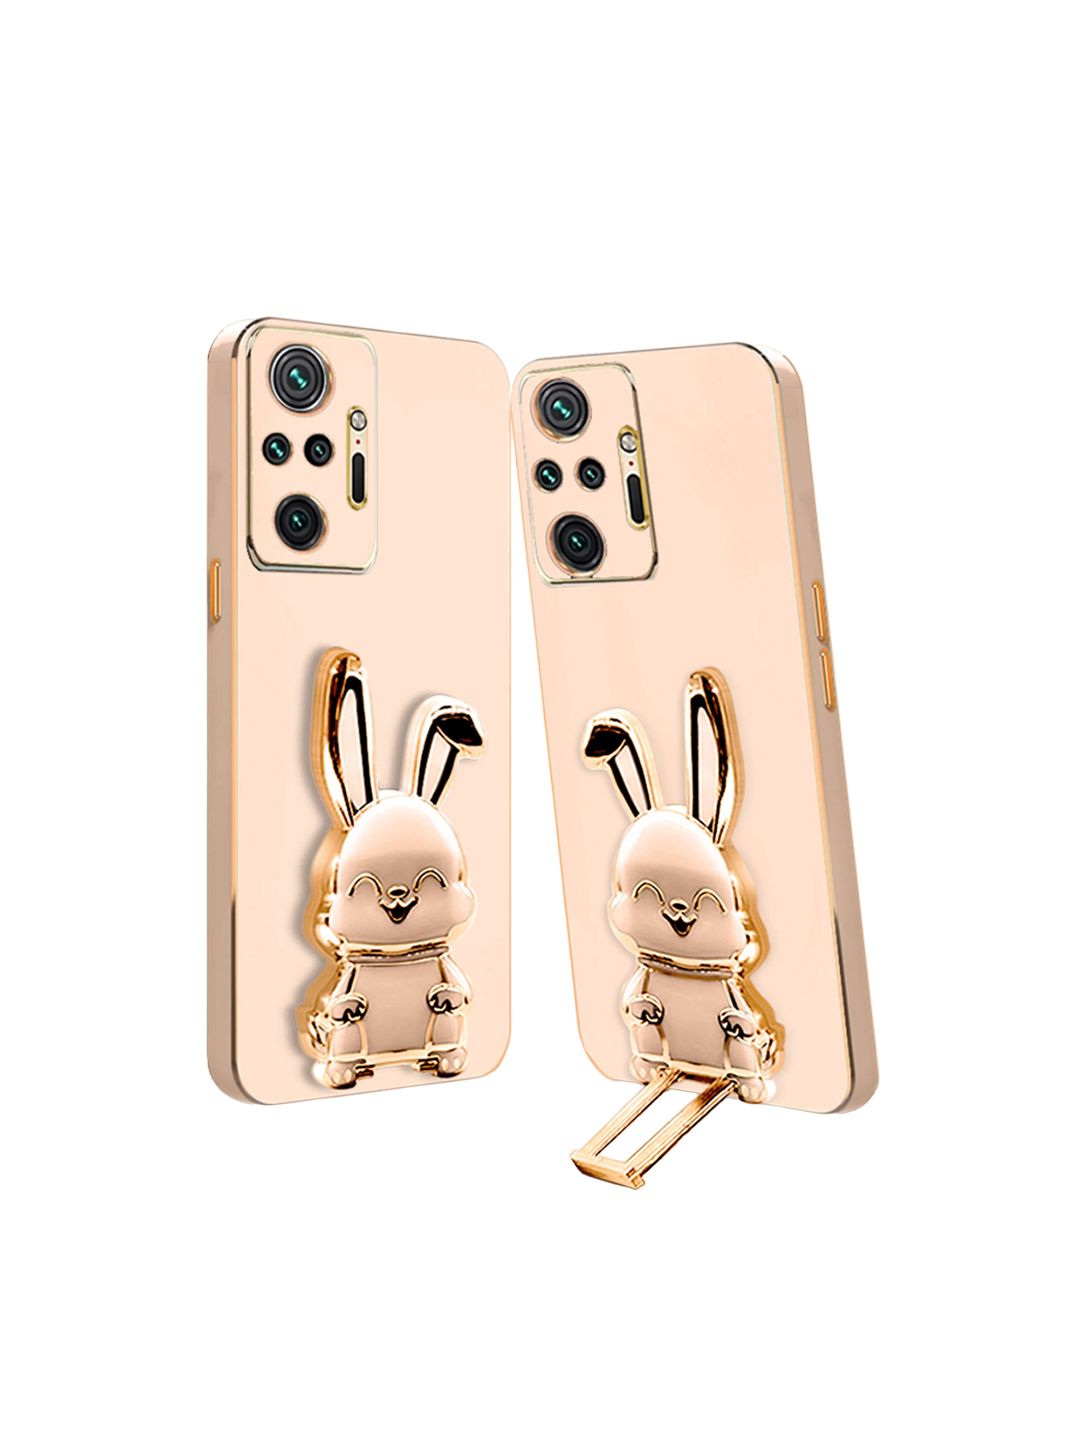 Karwan 3D Bunny With Folding Stand Redmi Note 10 Pro Back Cover Case